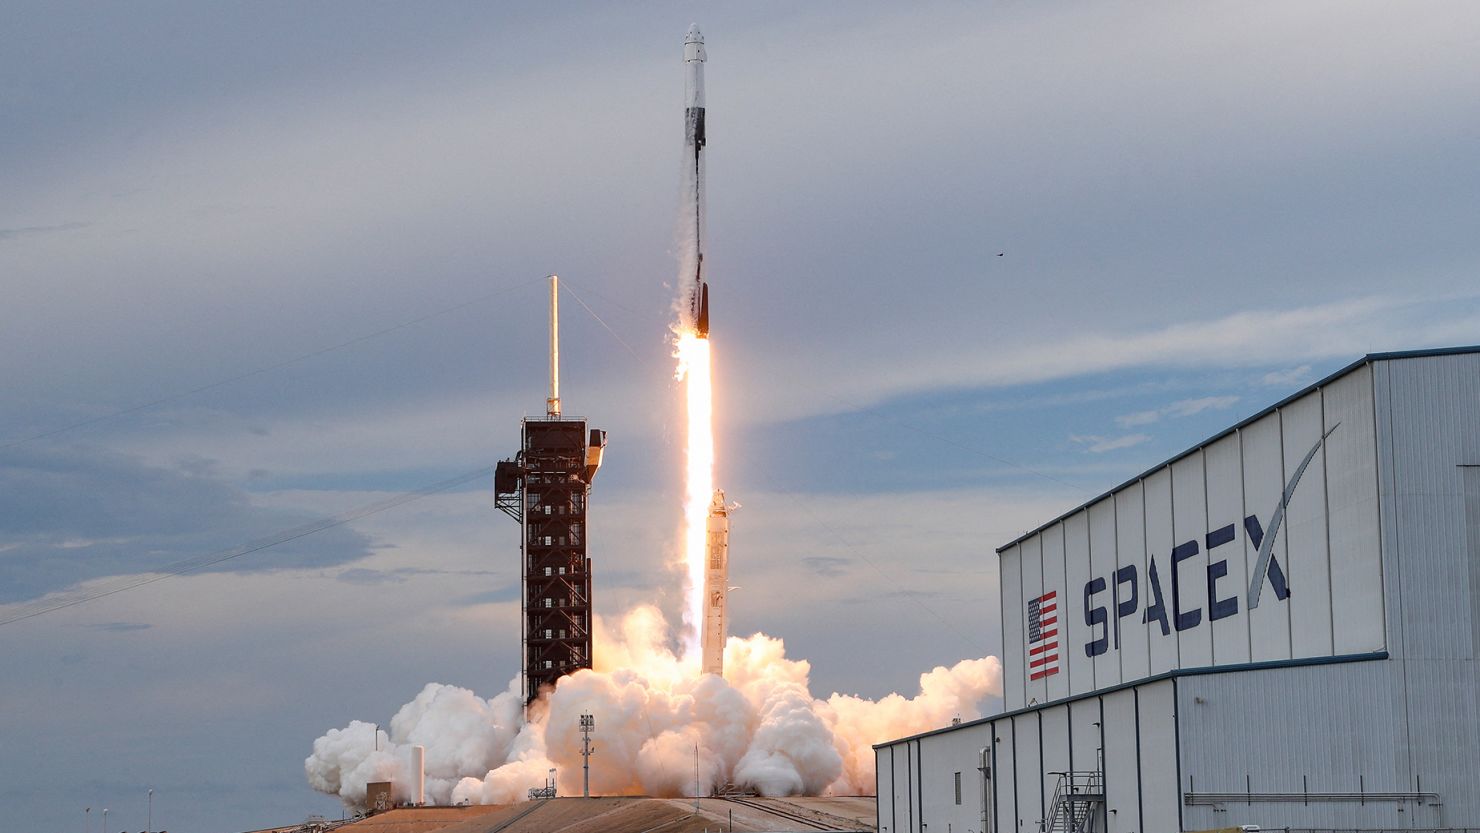 Amazon taps SpaceX for satellite launch even though Jeff Bezos has his own  rocket company | CNN Business